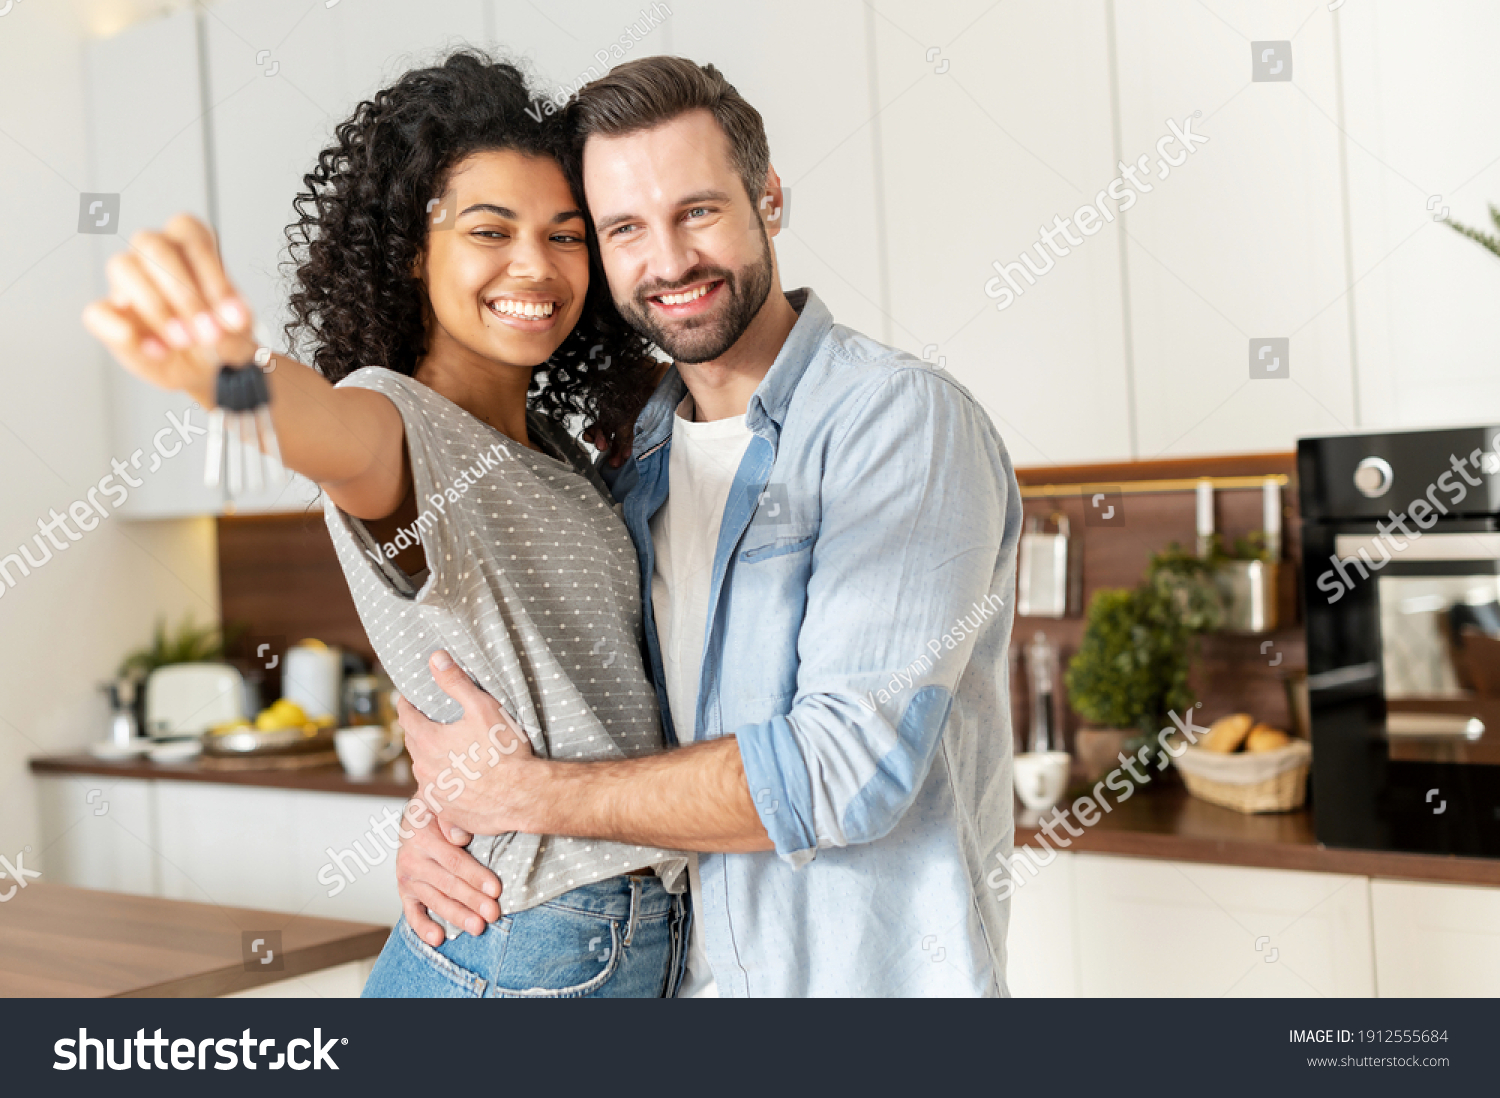 Young interracial married couple homeowners smiling, showing keys from a new apartment, hugging and looking at the camera, standing in the kitchen and celebrating moving in a new home, family concept #1912555684